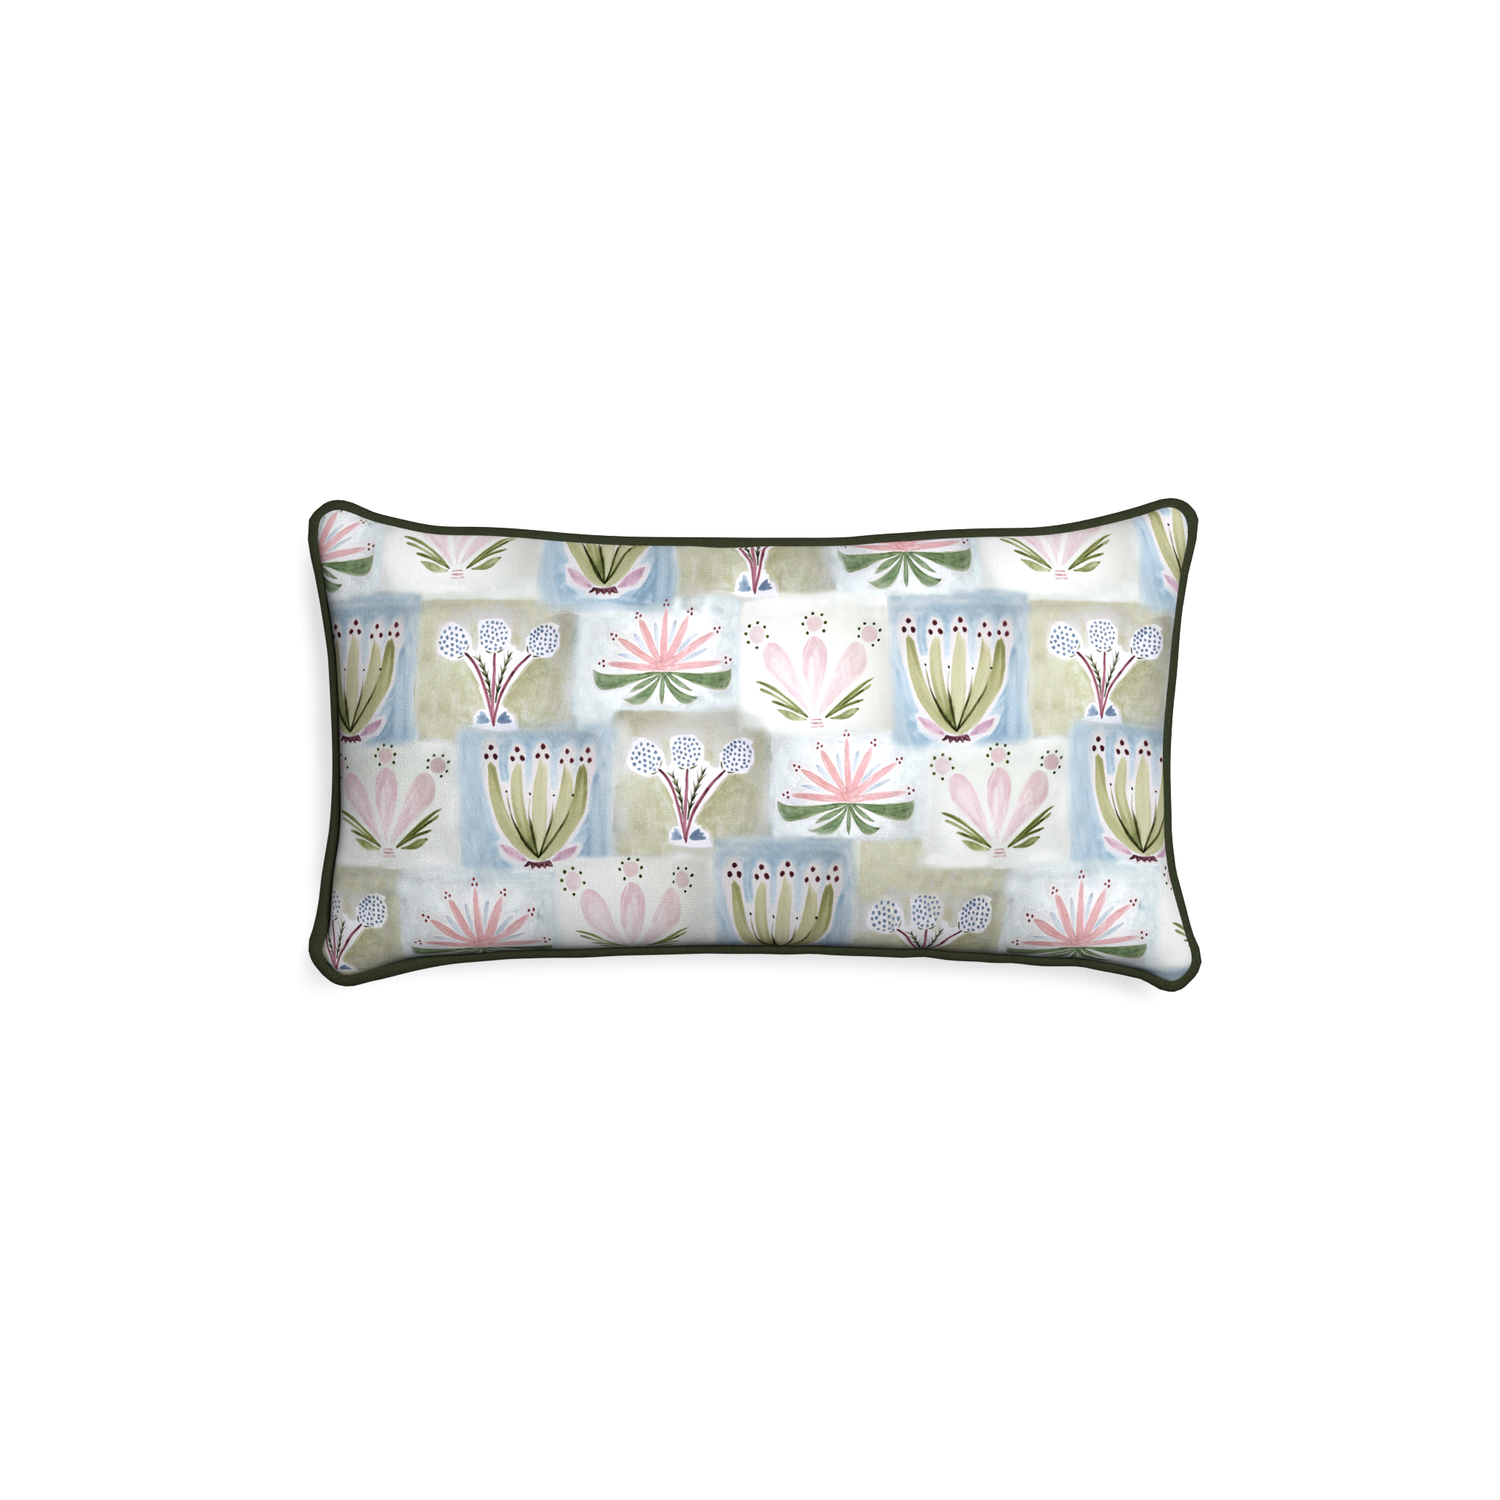 Petite-lumbar harper custom hand-painted floralpillow with f piping on white background